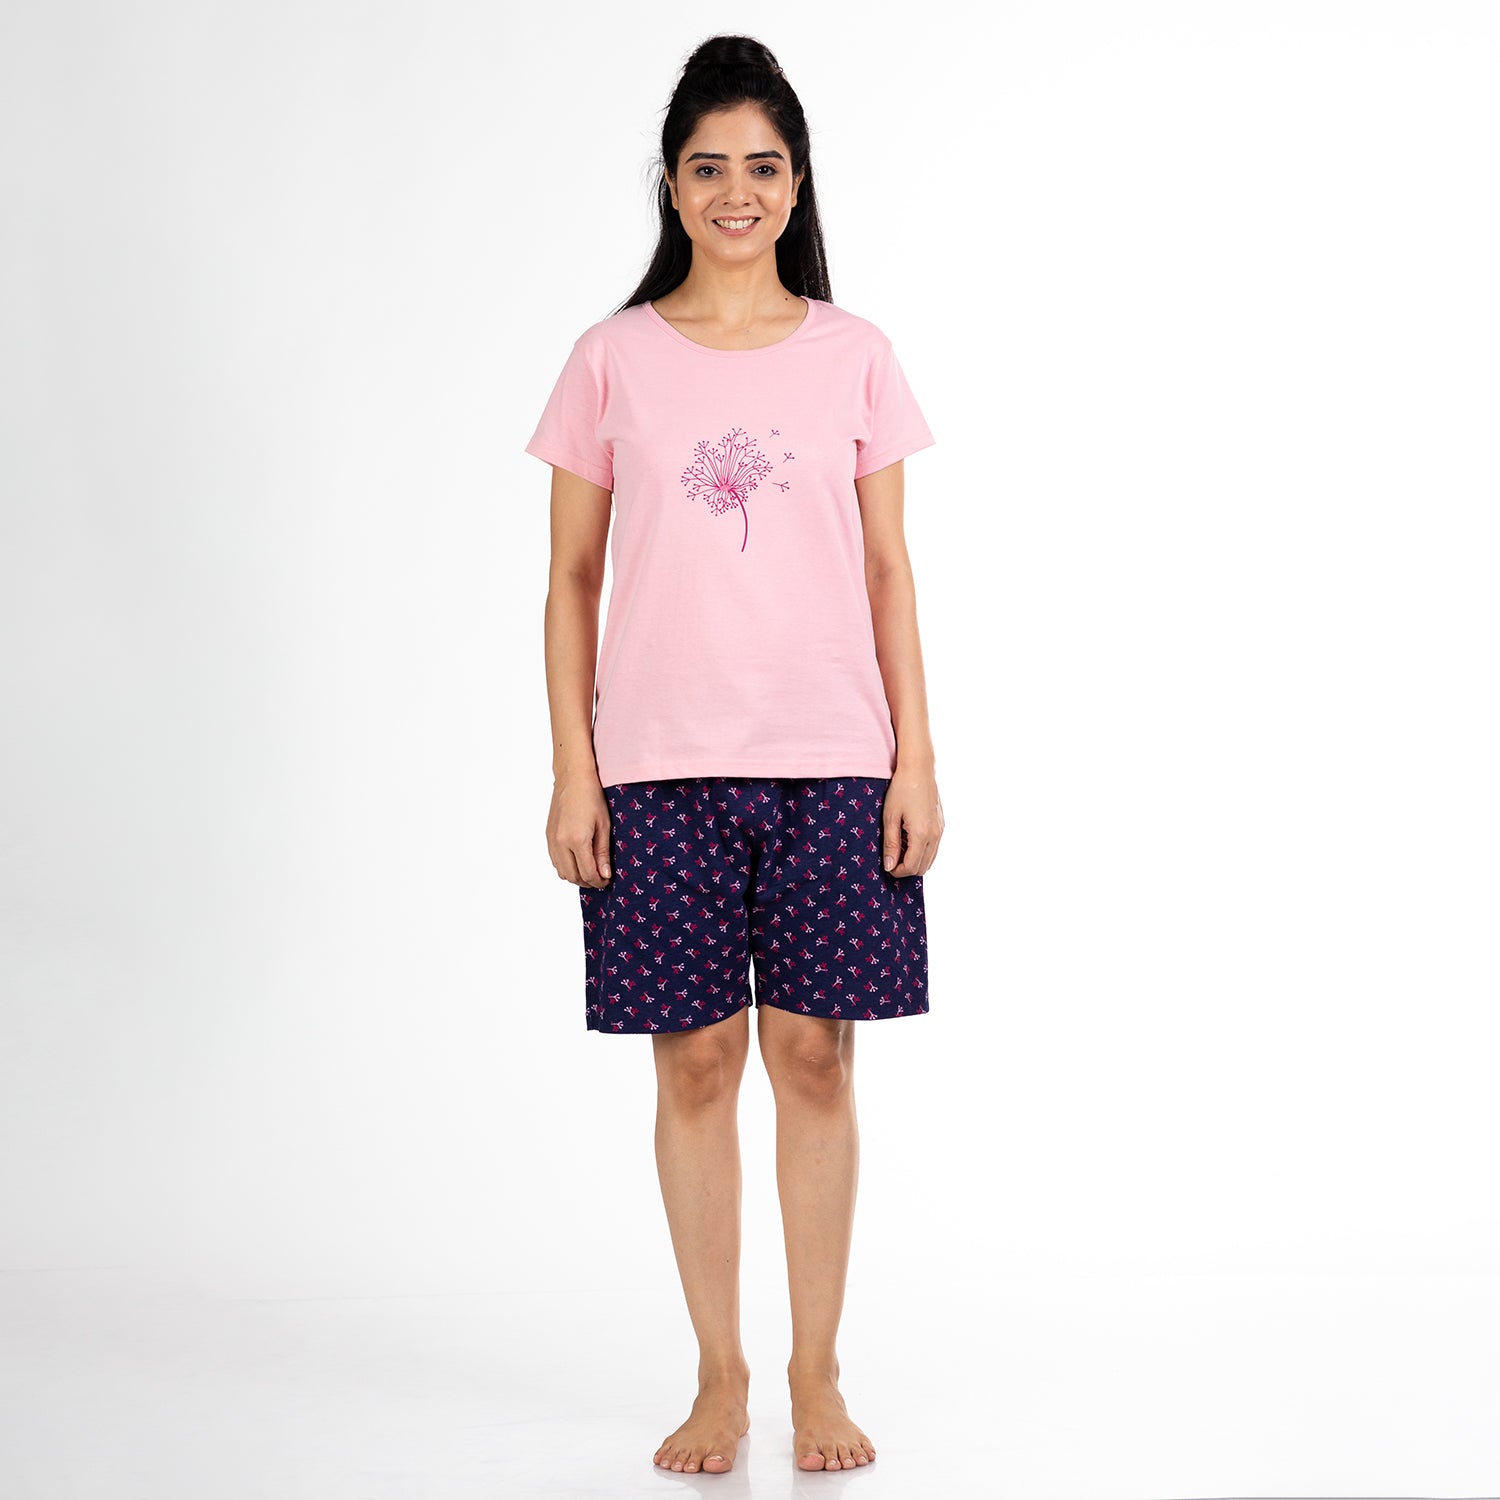 pink colour tshirt perfect to wear as a night wear also also casually with jeans pants or shorts